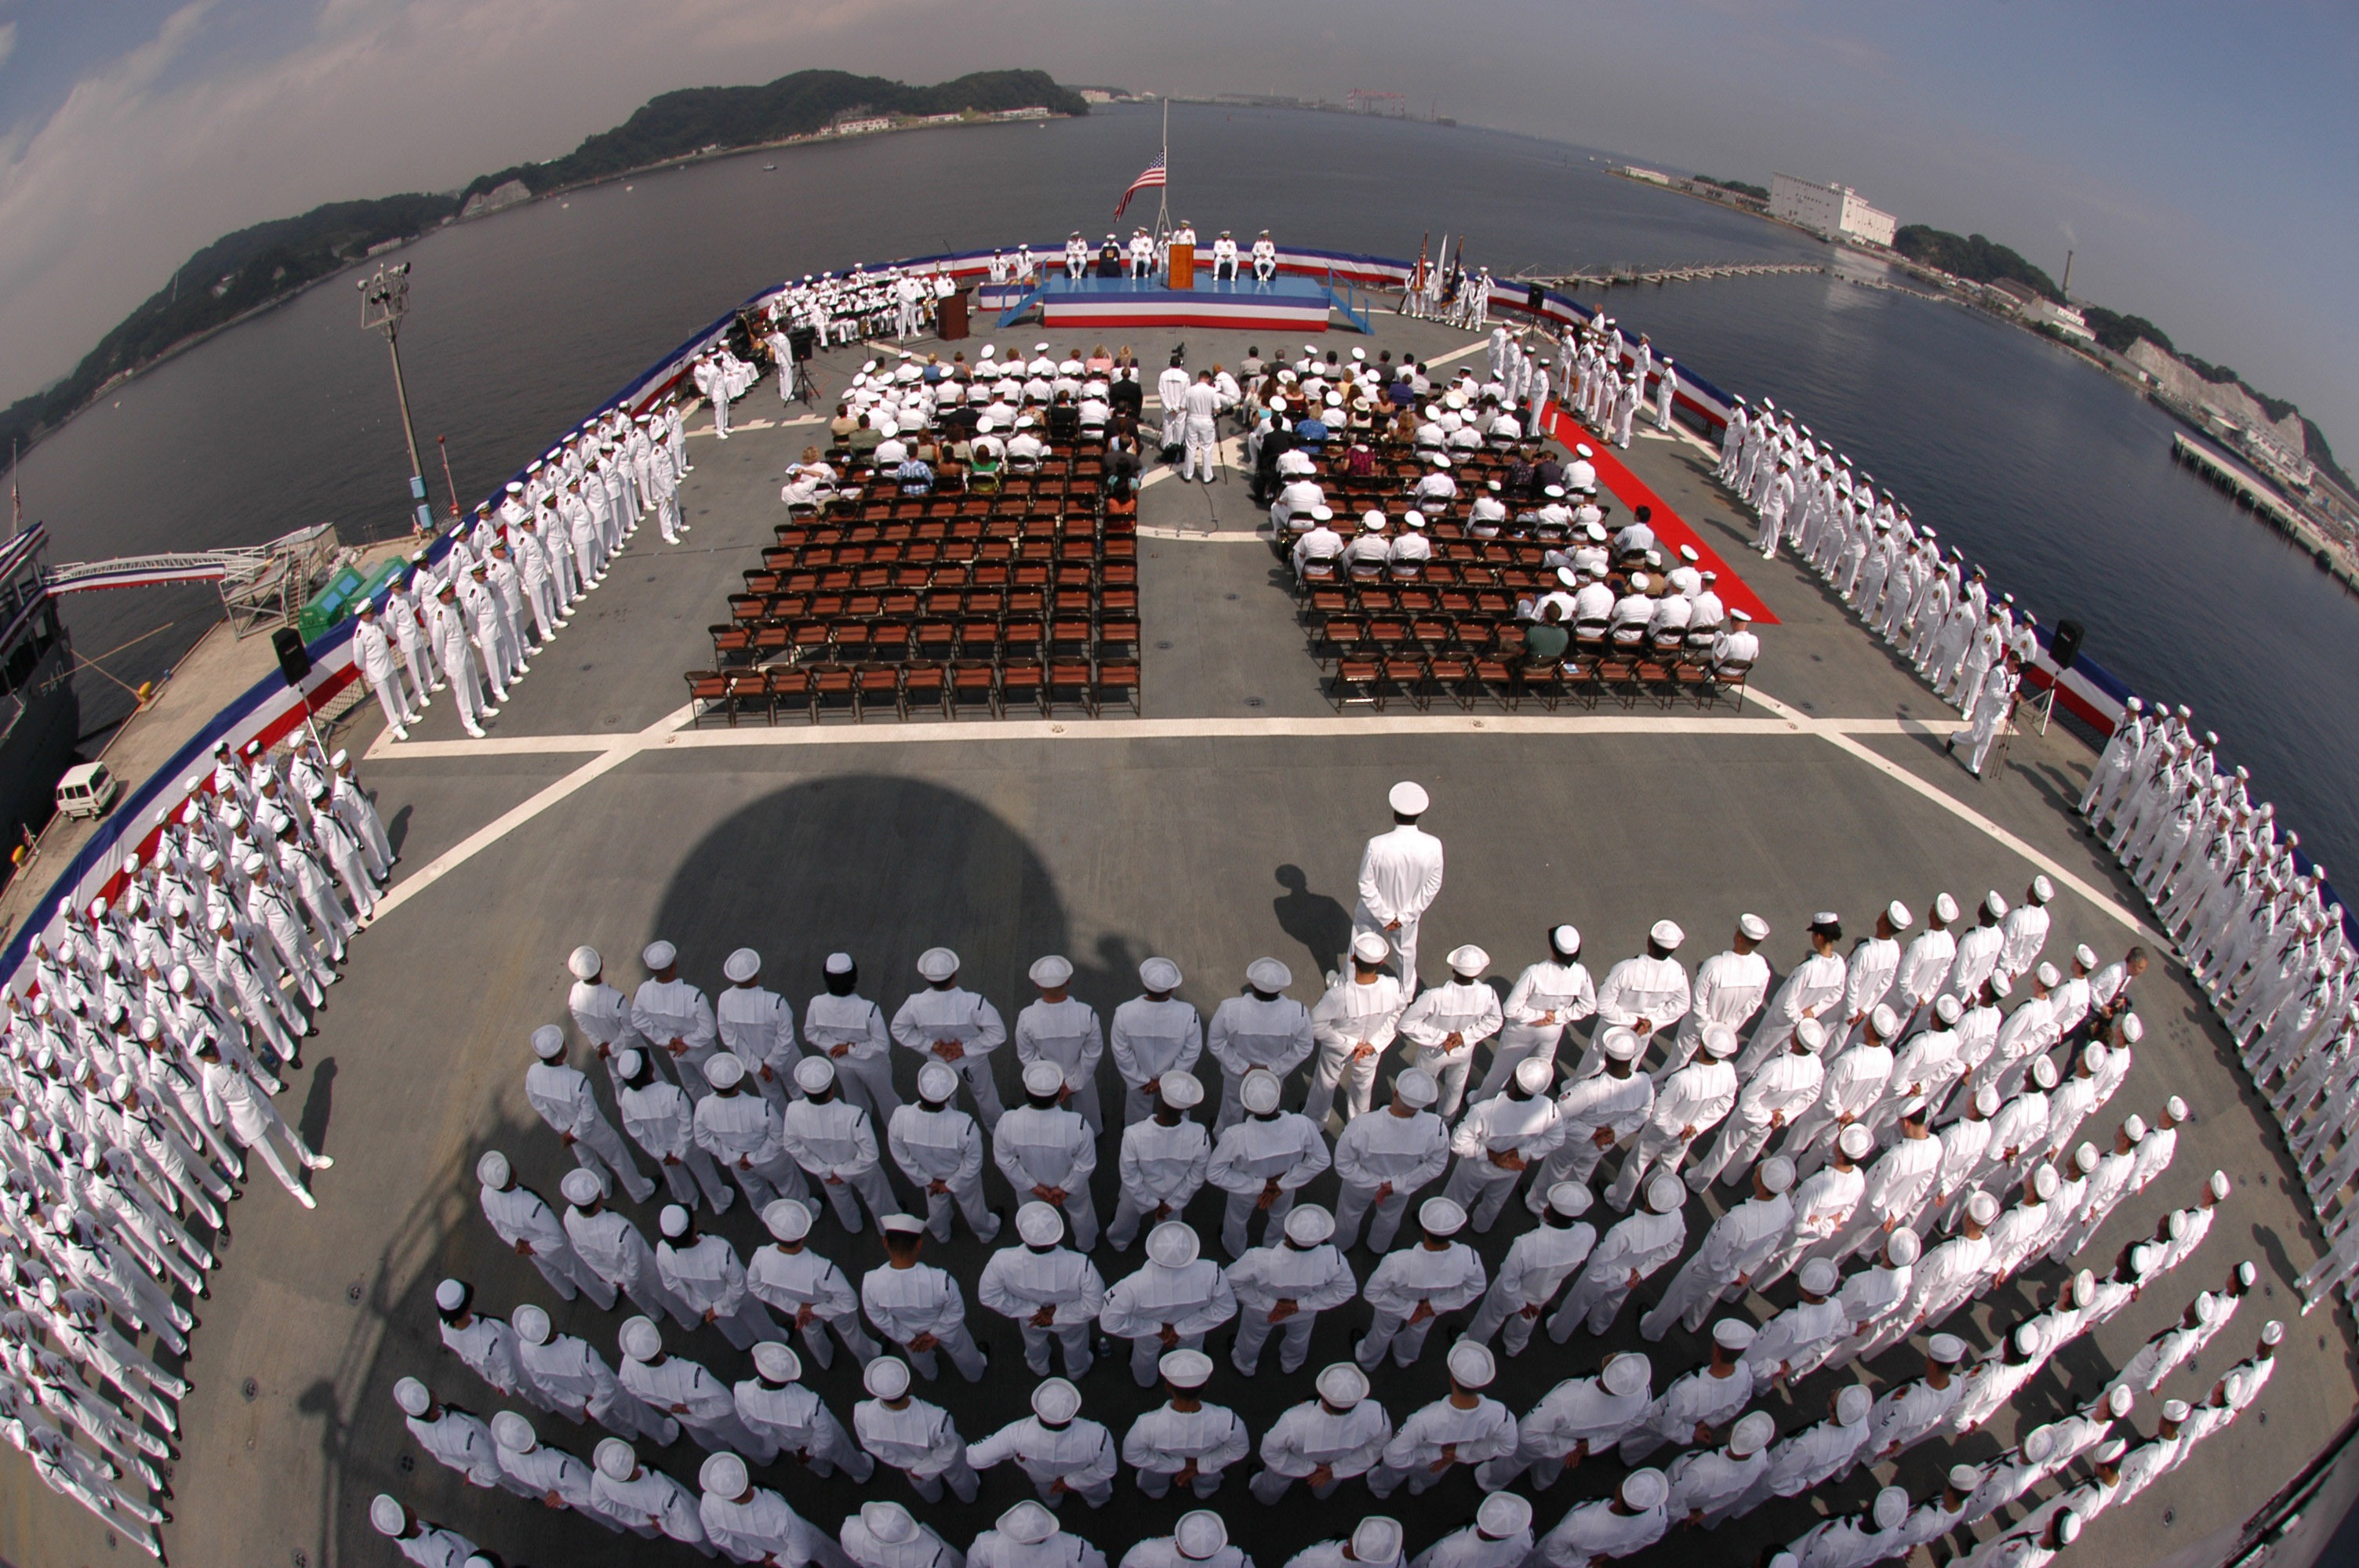 photography, fisheye, aircraft carrier, ceremony, military, navy, sailor, ship 5K